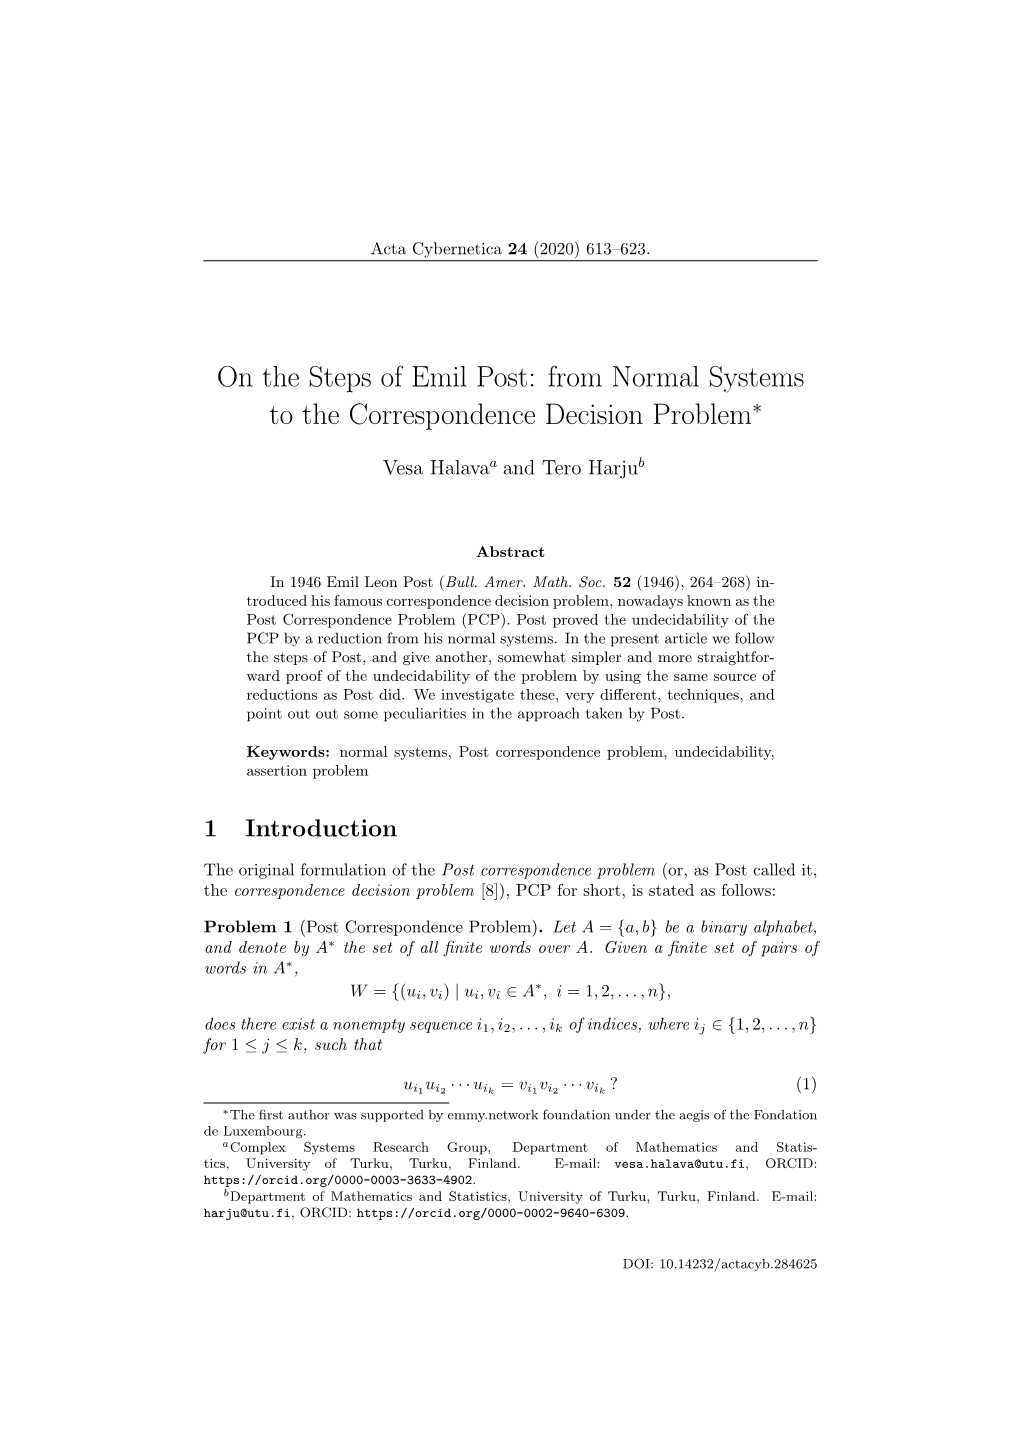 On the Steps of Emil Post: from Normal Systems to the Correspondence Decision Problem∗